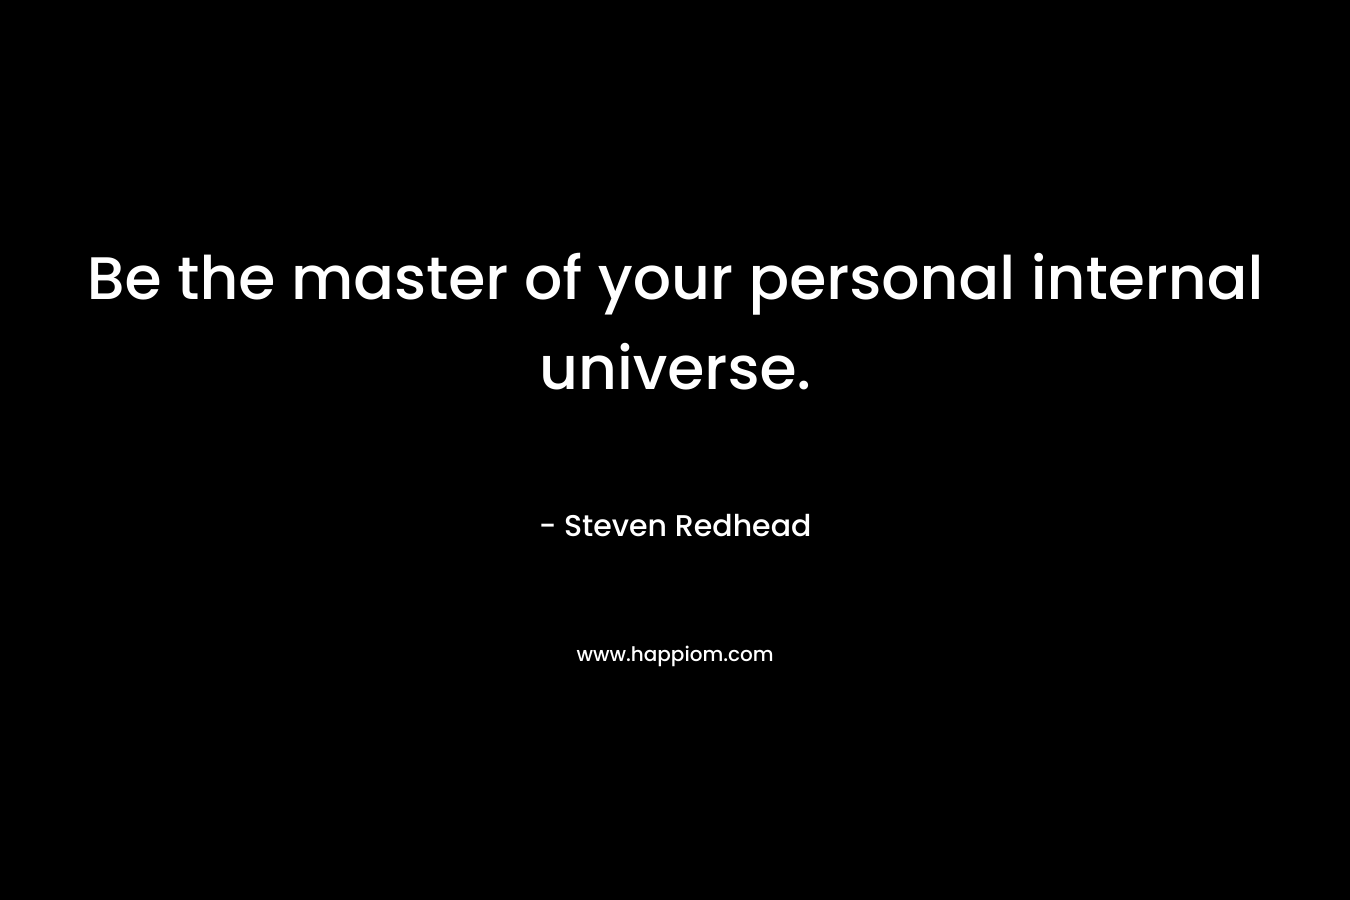 Be the master of your personal internal universe.